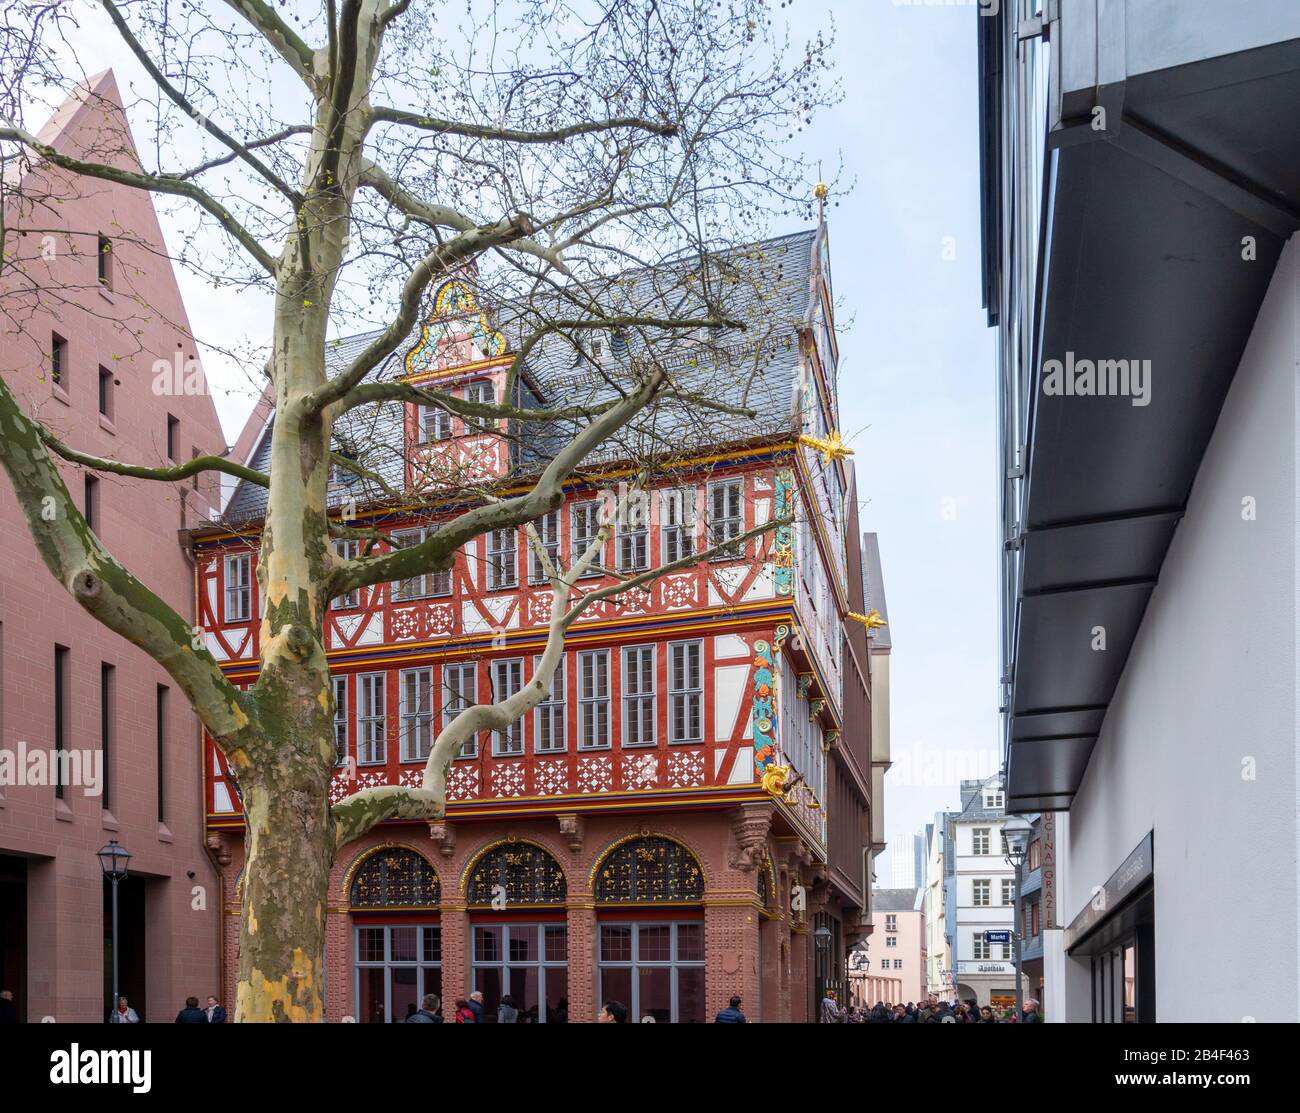 Germany, Hesse, Frankfurt, reconstruction 'Haus zur Goldenen Waage' medieval half-timbered house in the old town. Stock Photo